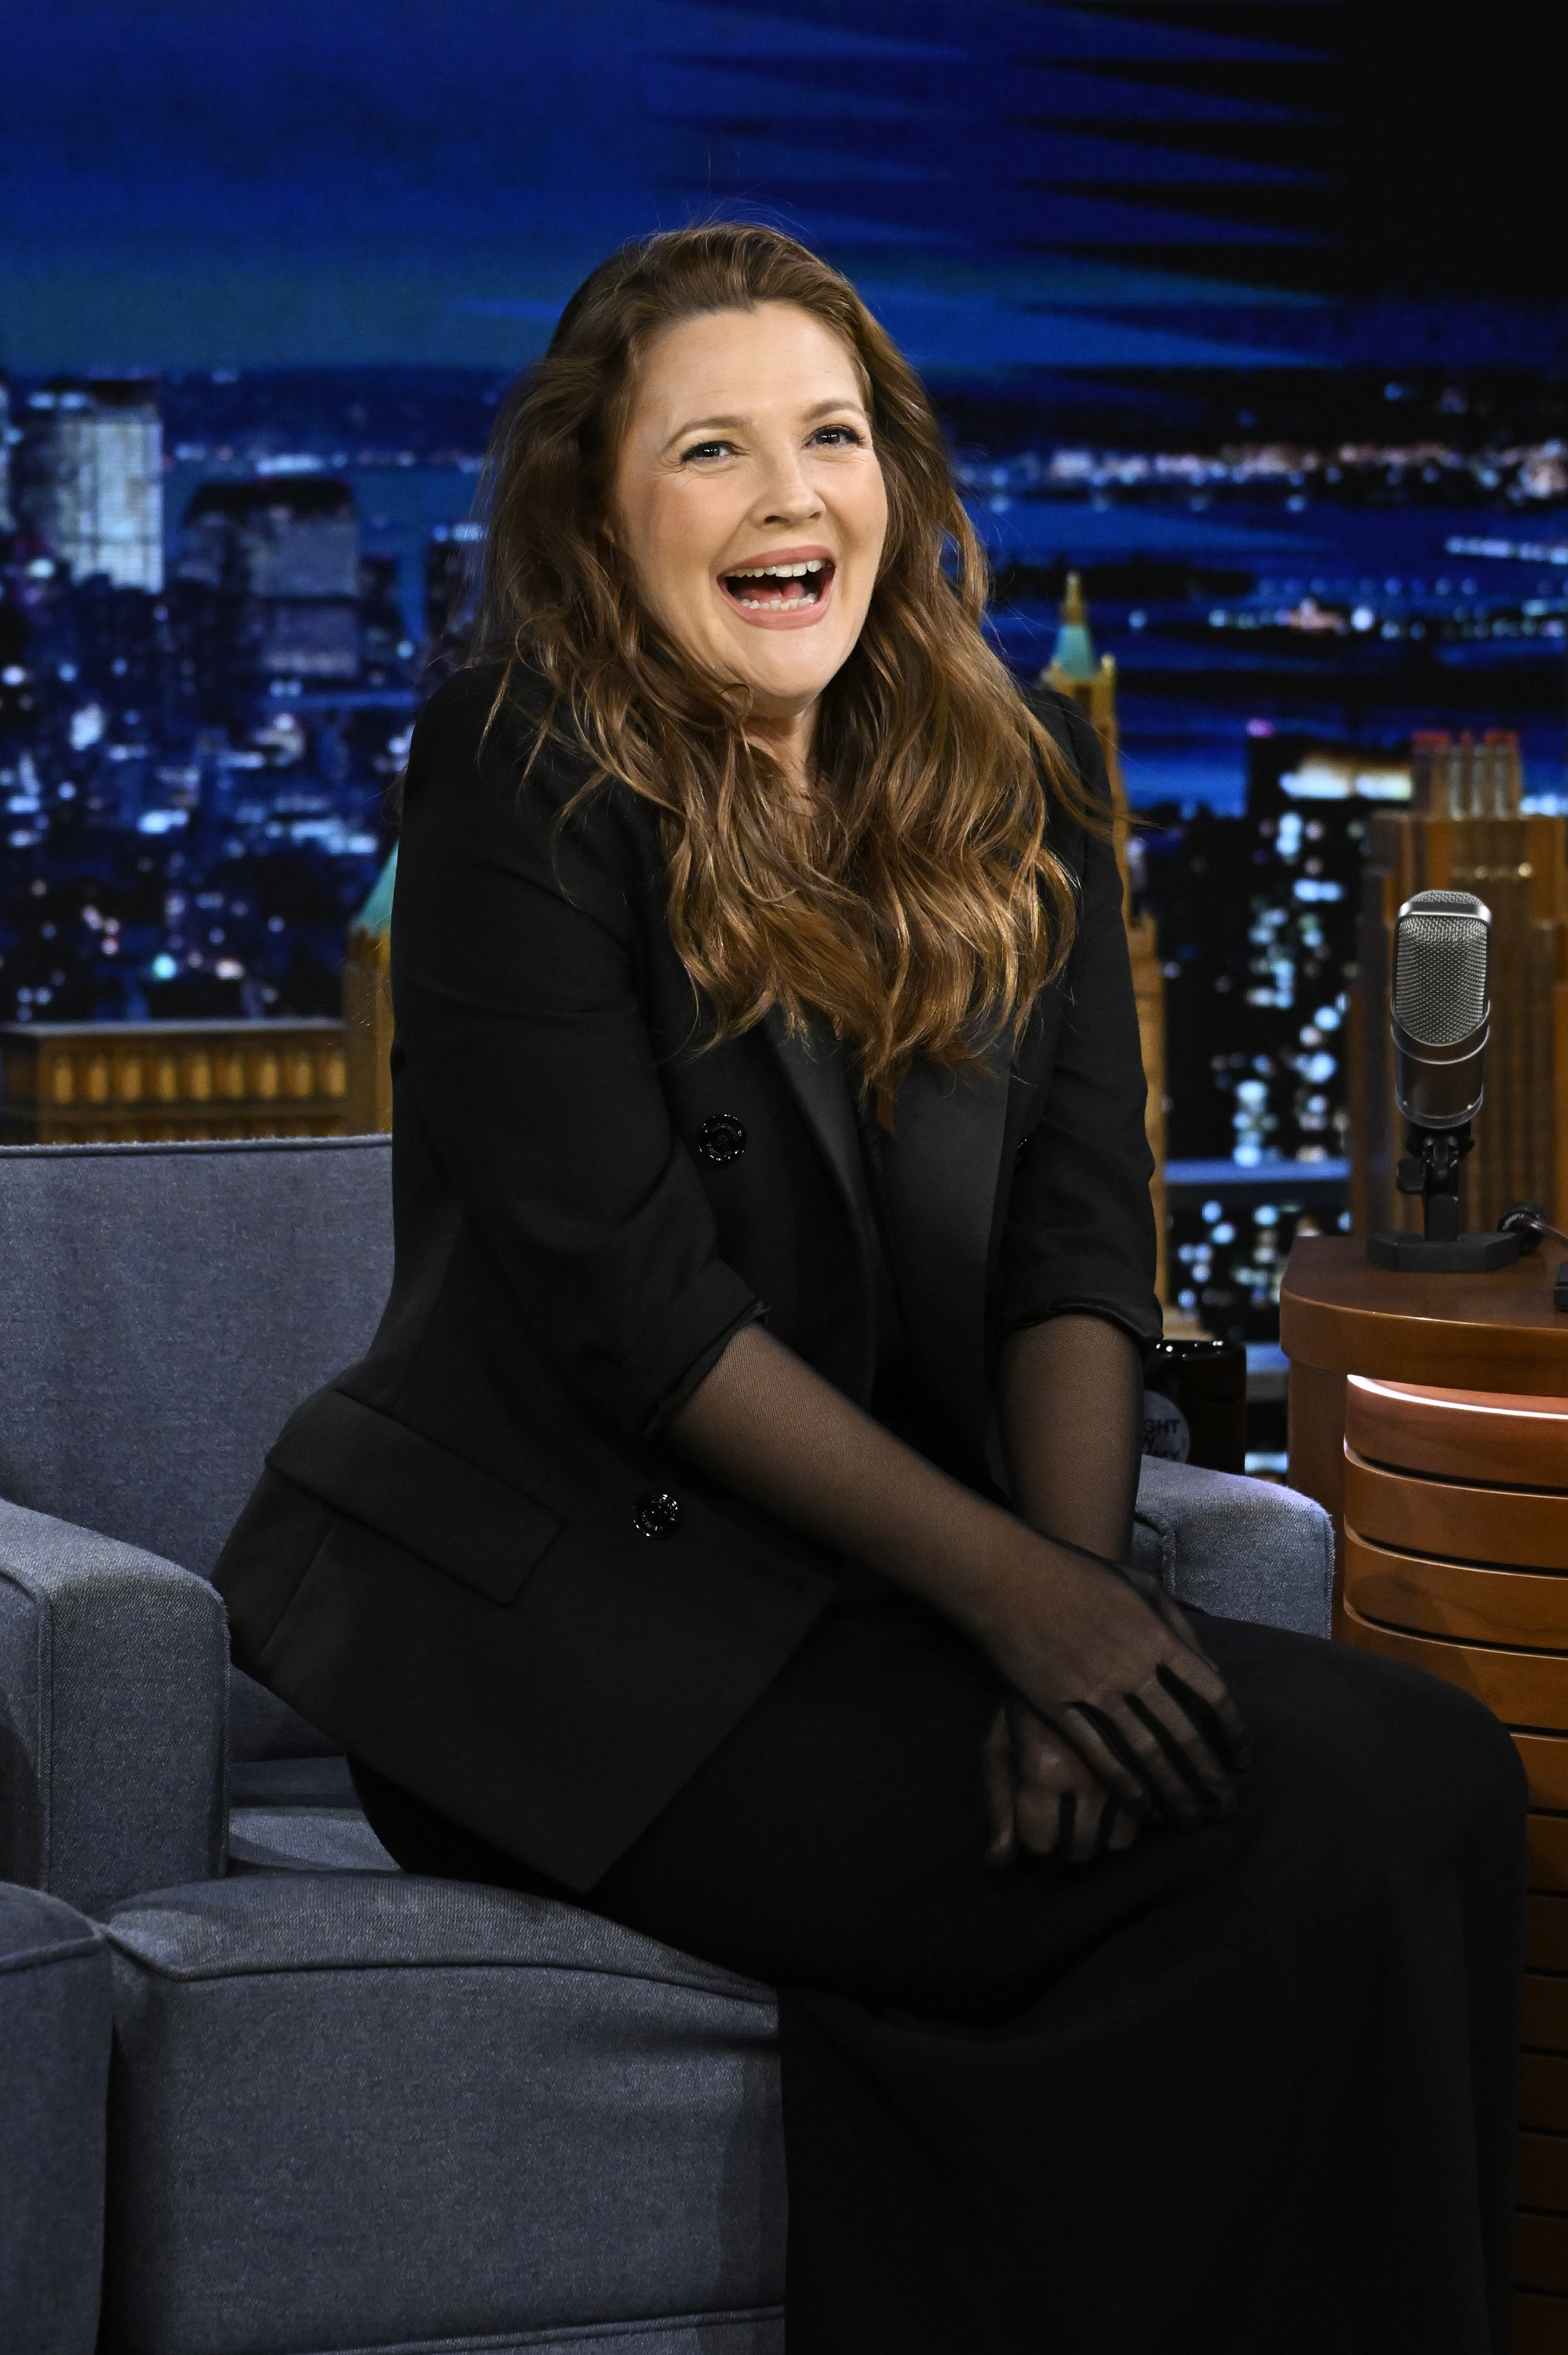 Closeup of Drew Barrymore smiling during a talk show interview